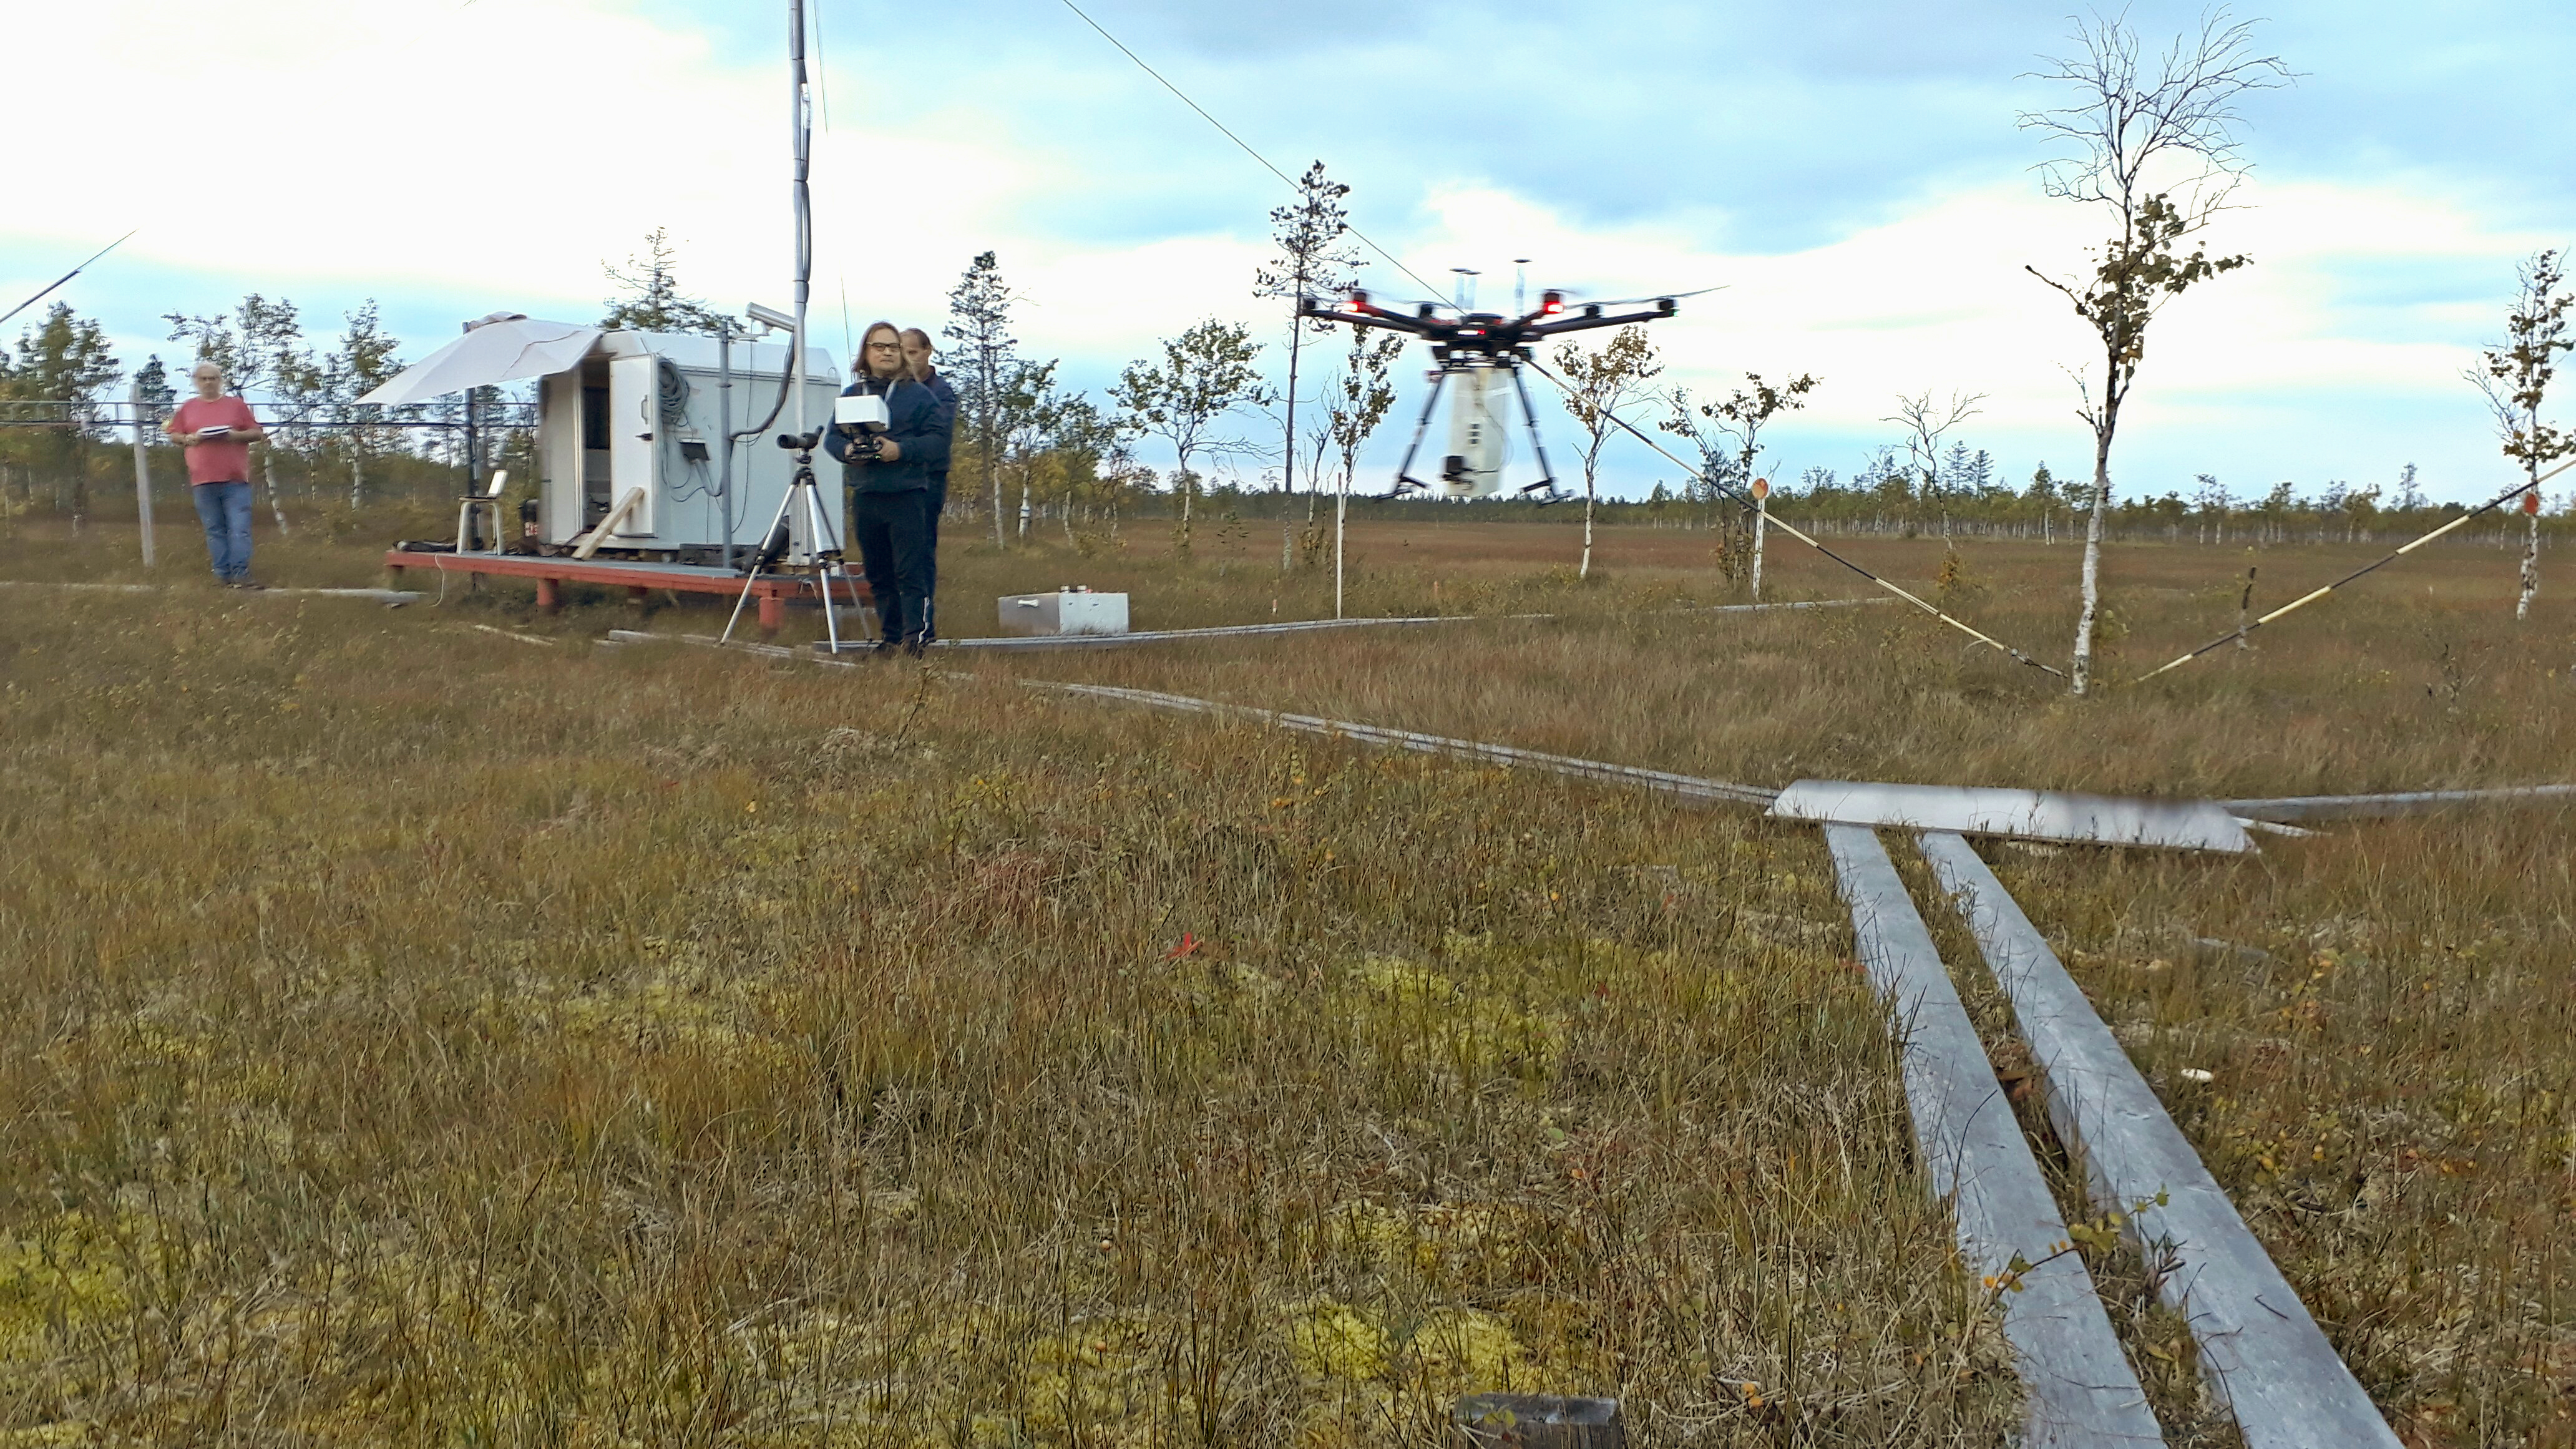 The spectroscopy group take methane measurements with a drone over wetlands.